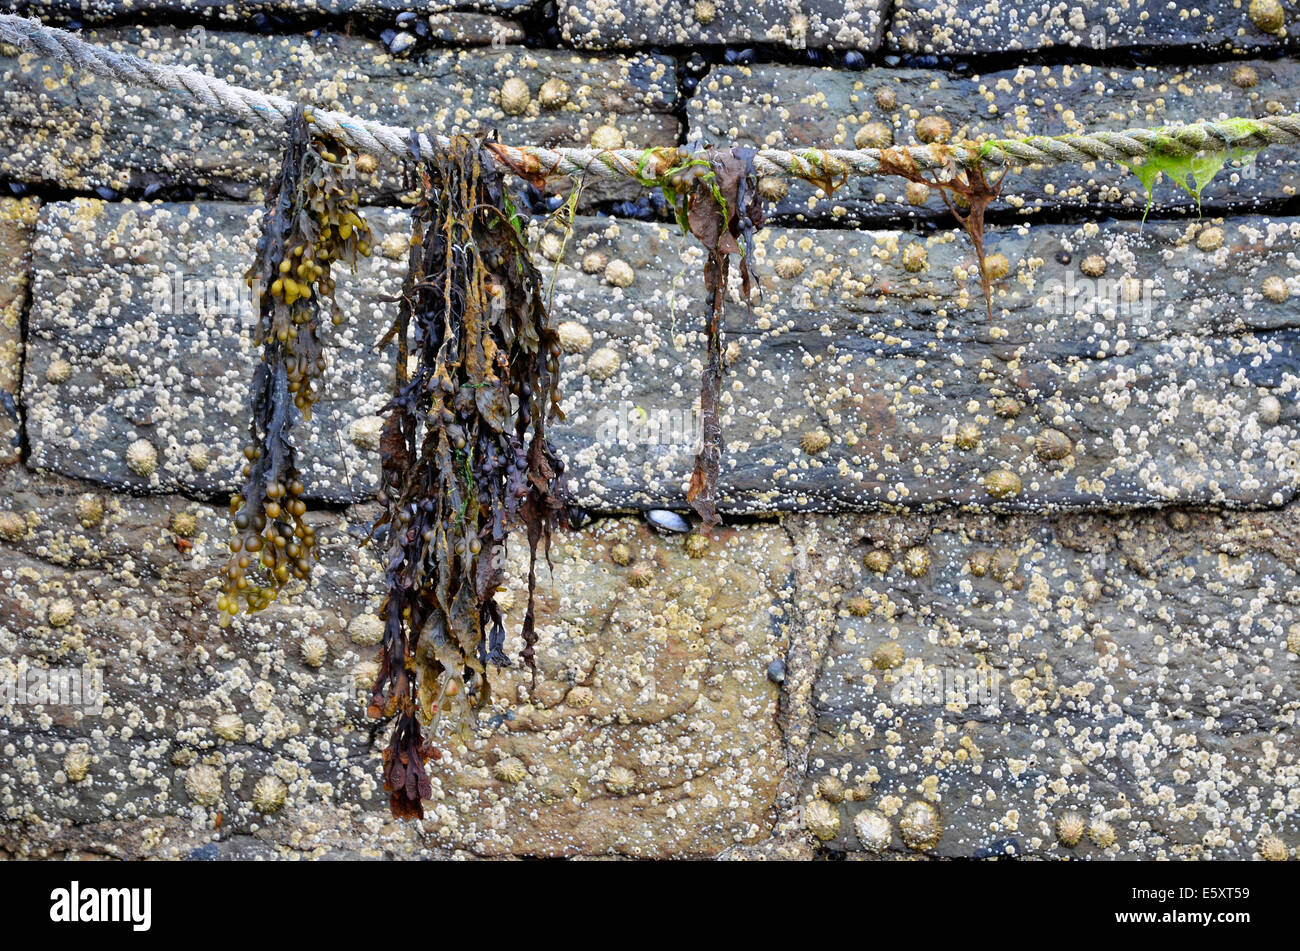 Bladder wrack seaweed hanging from the mooring rope of a boat in Mullaghmore harbour, County Sligo, Ireland Stock Photo